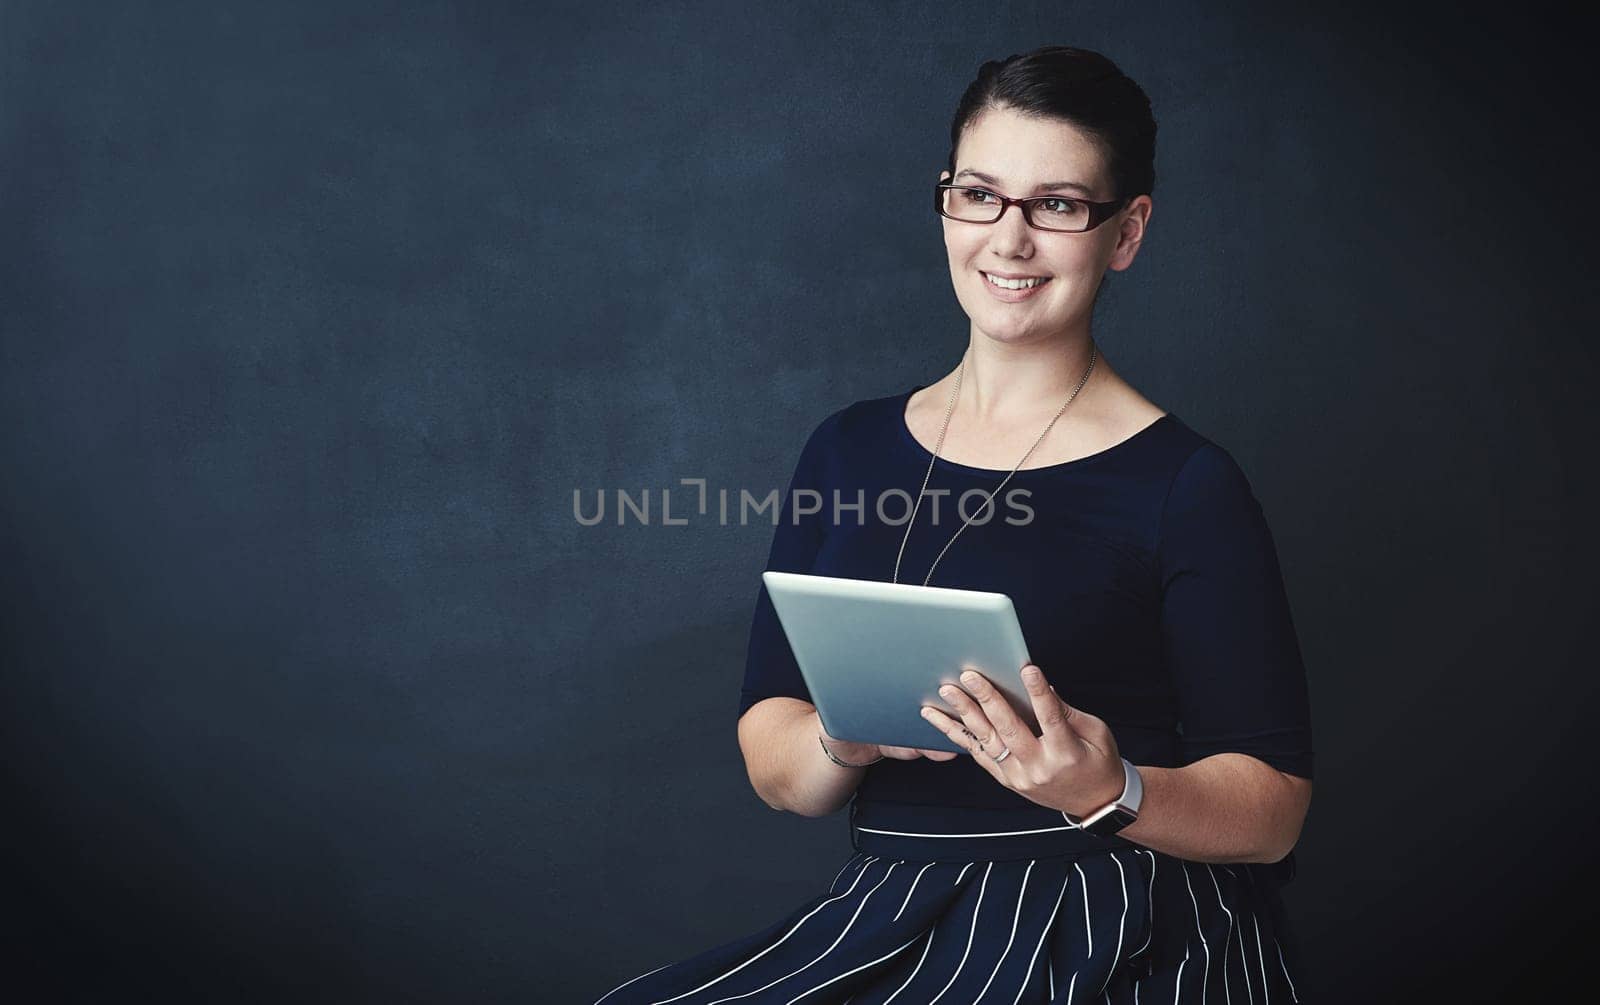 Innovation is always on her mind. Studio portrait of a corporate businesswoman using a digital tablet against a dark background. by YuriArcurs